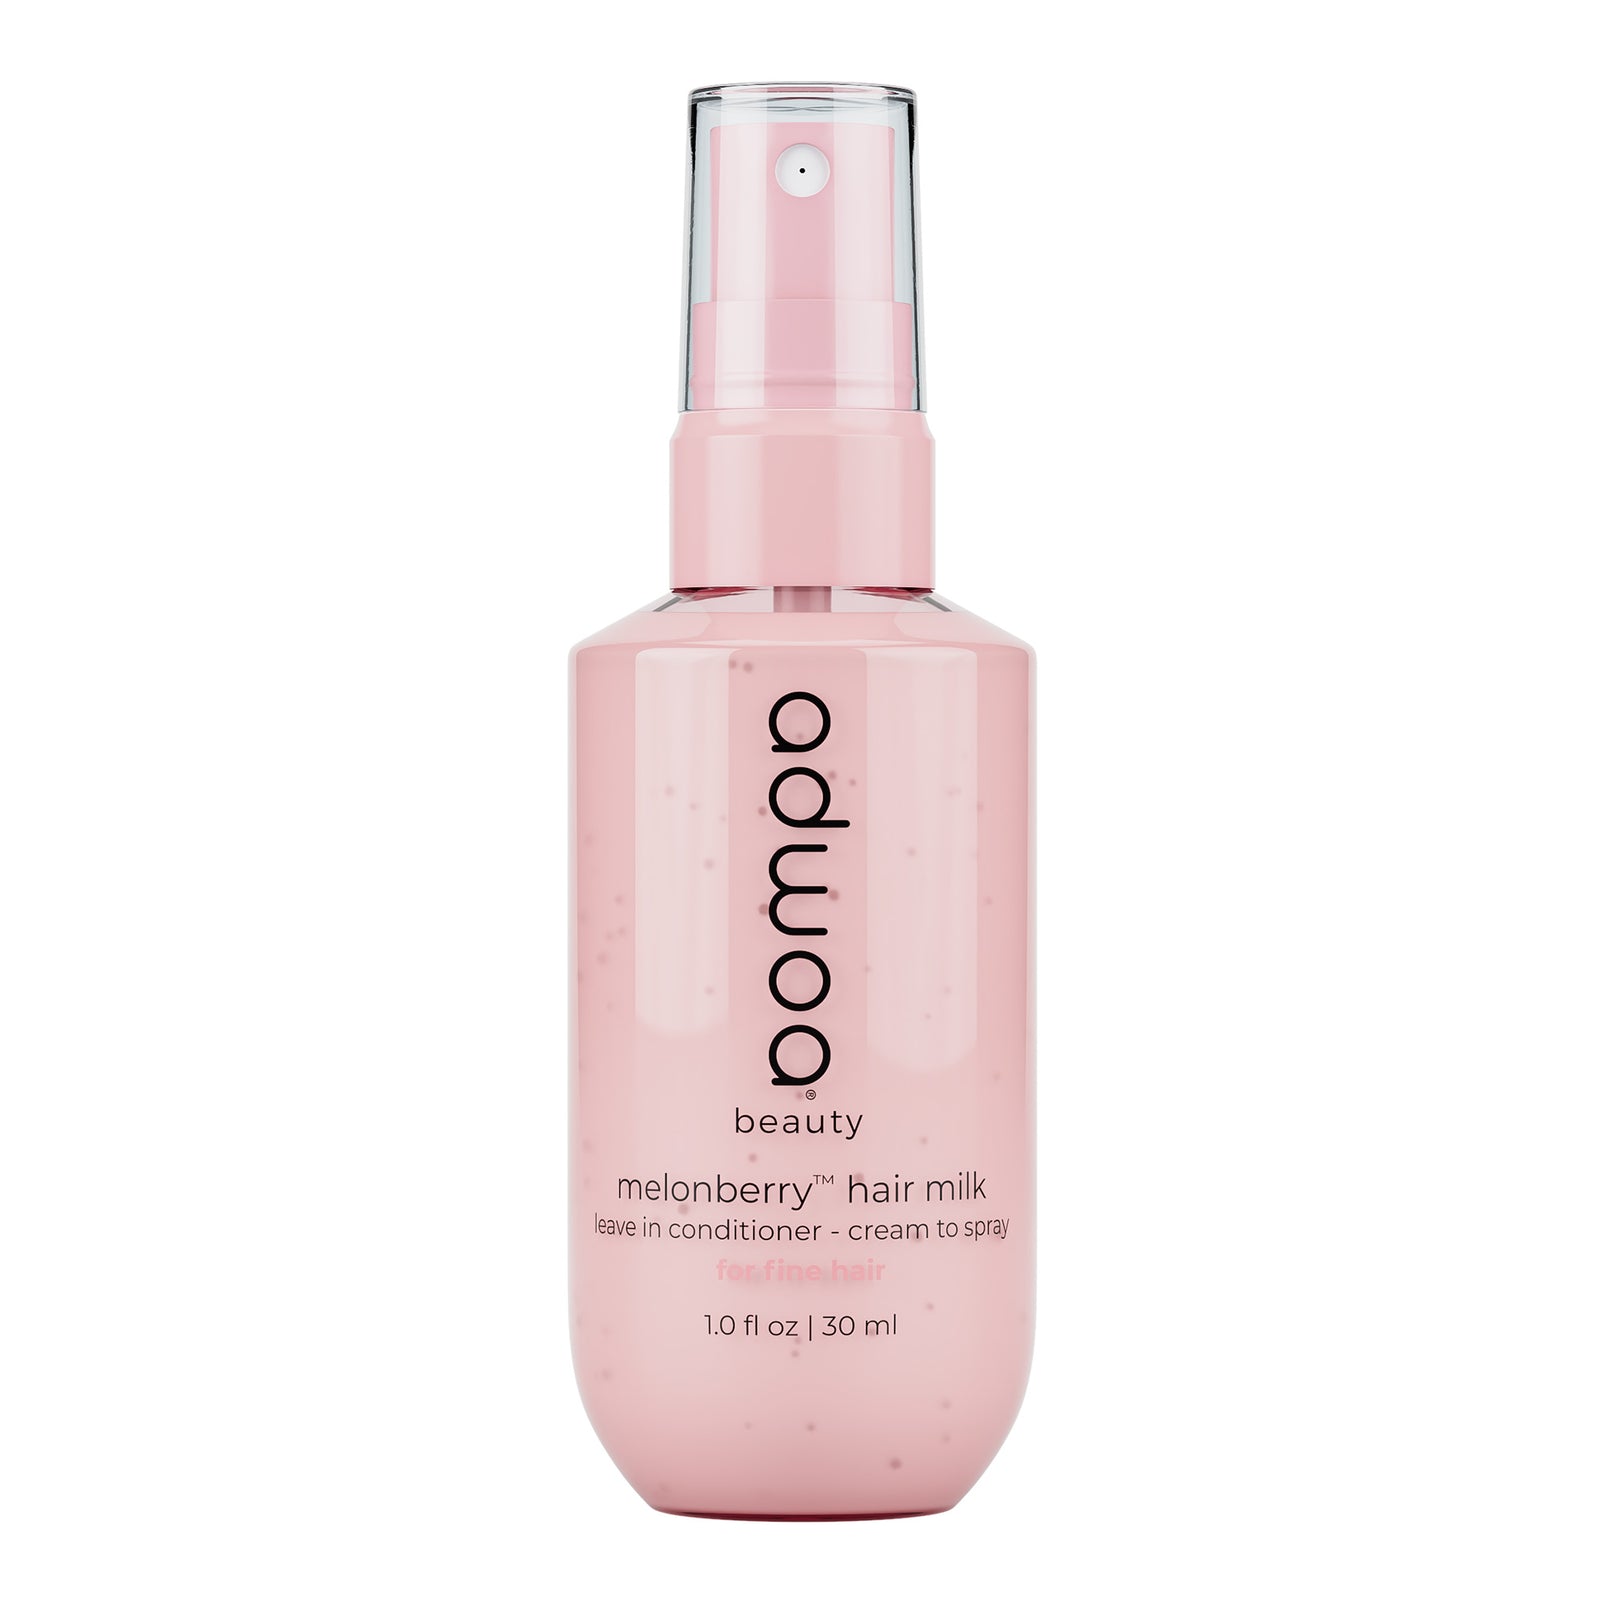 hair milk leave-in conditioner with melonberry™